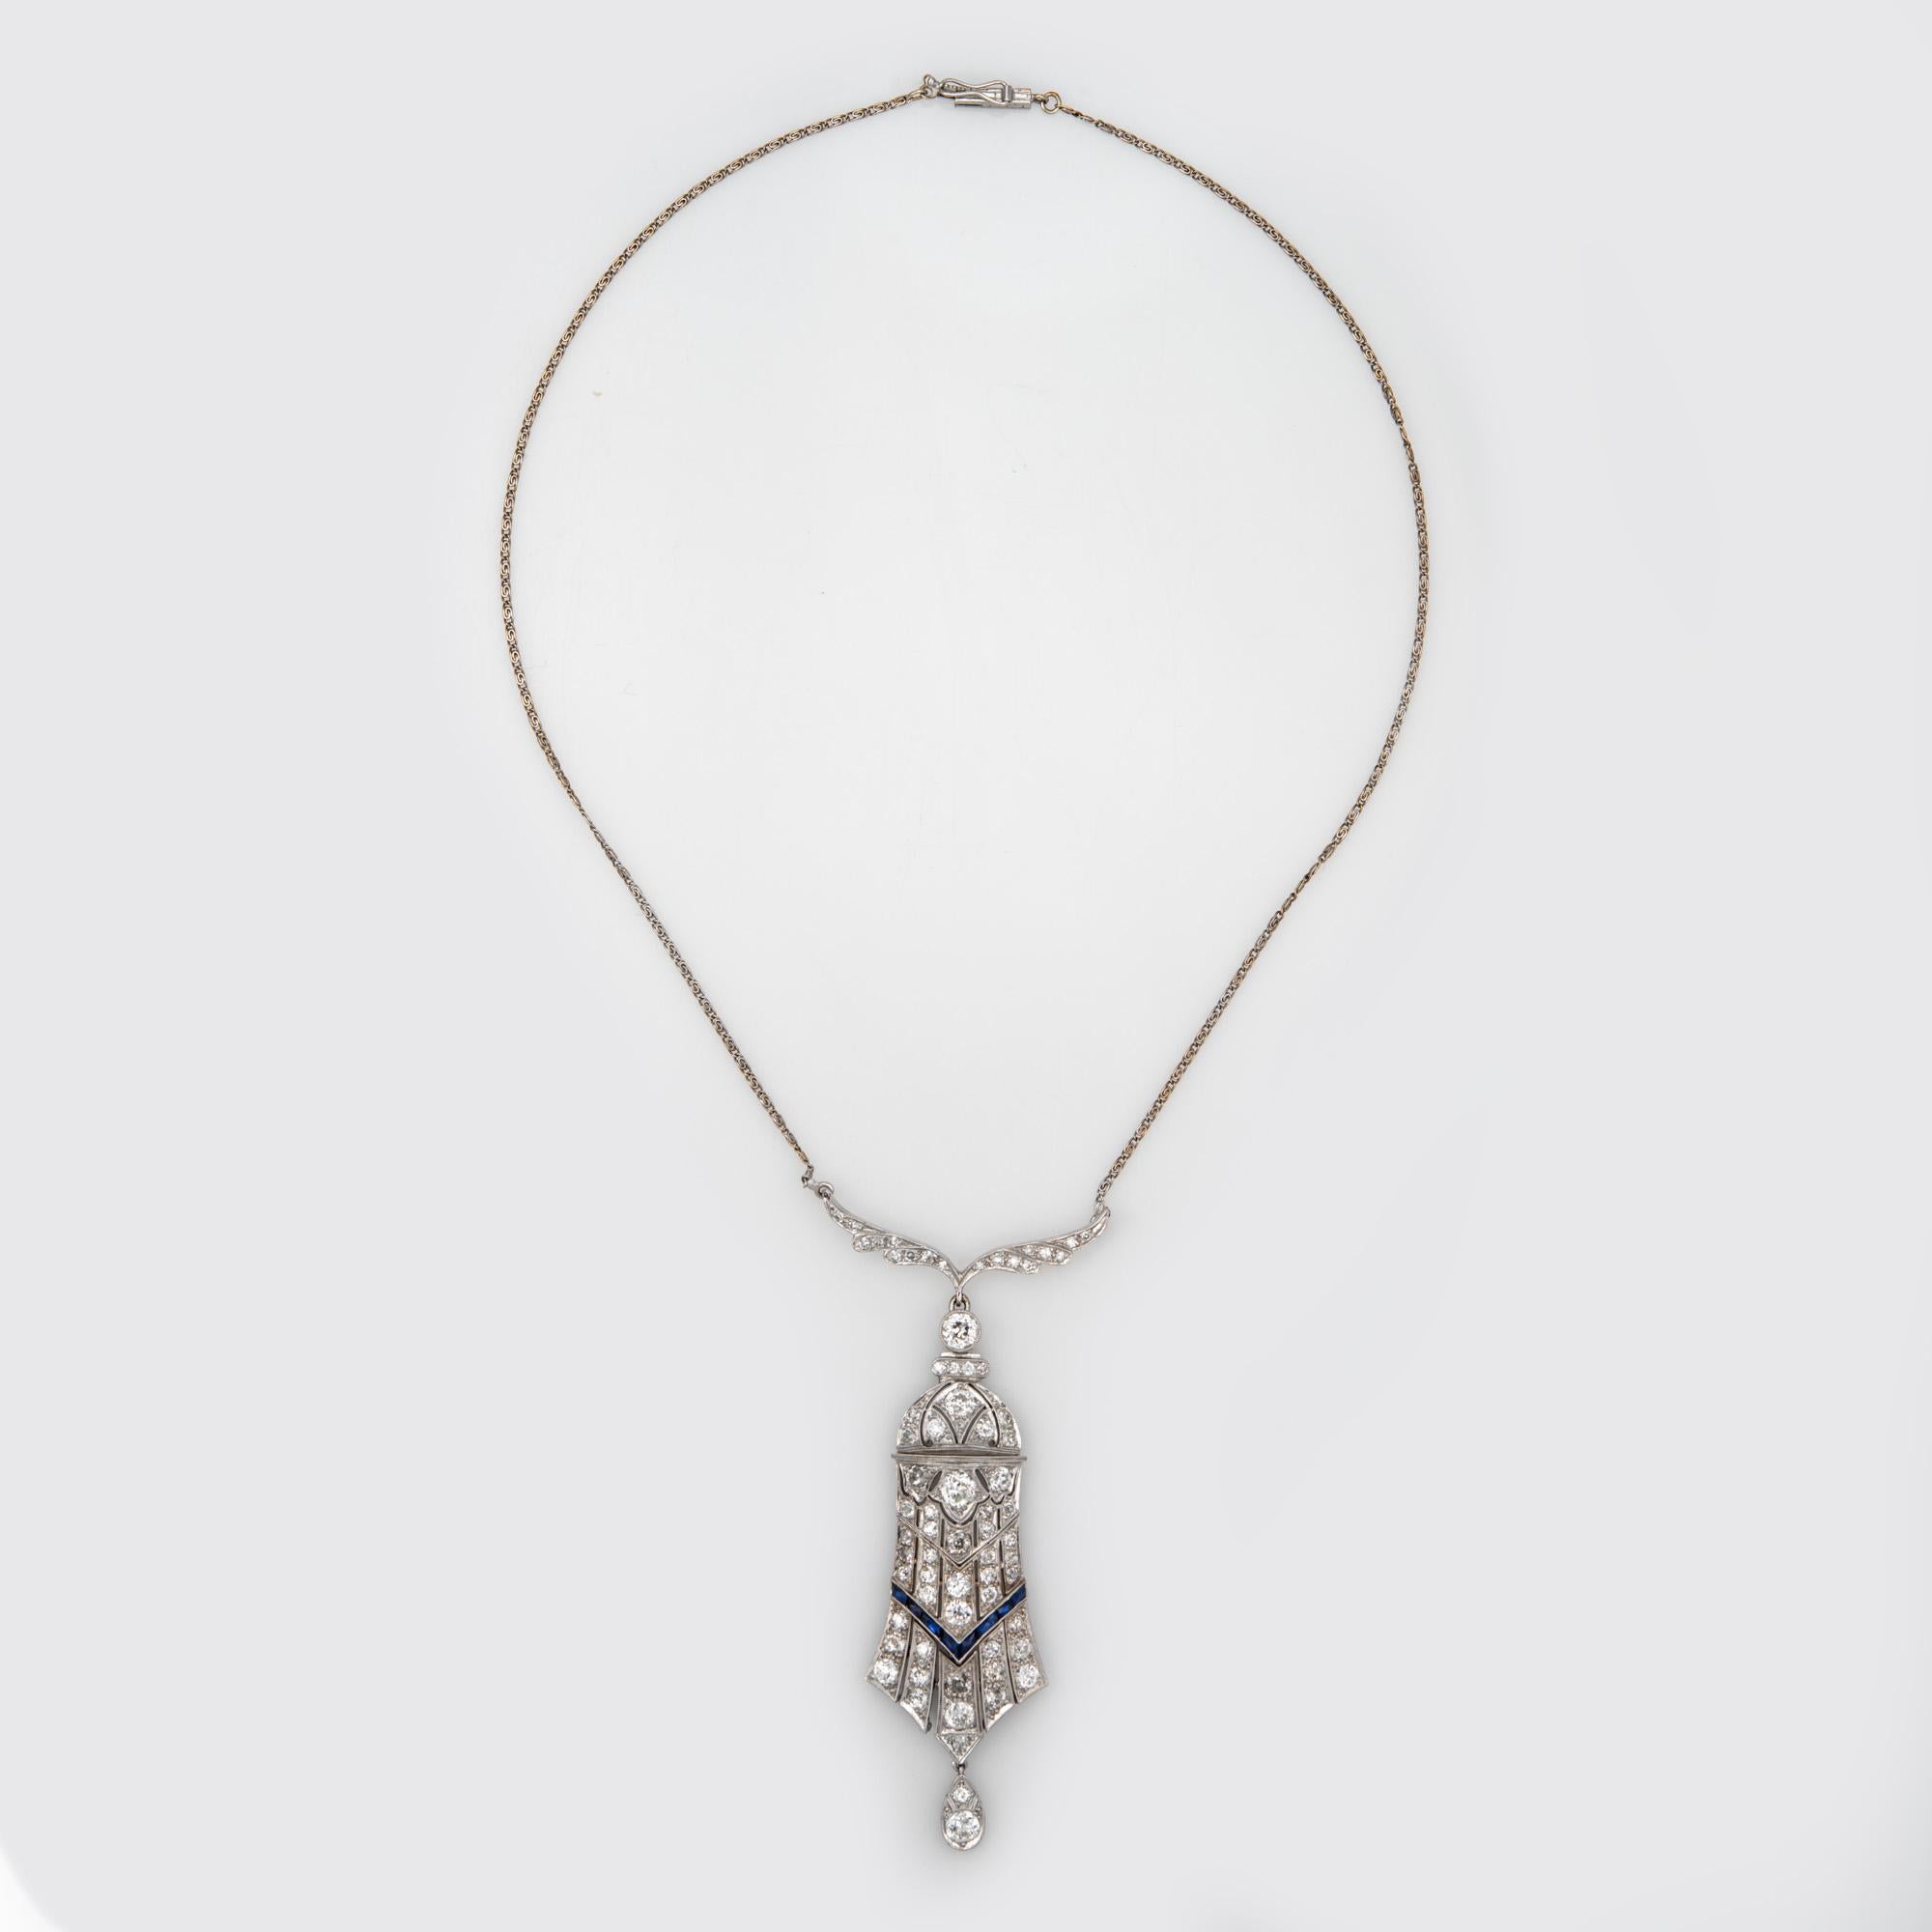 Finely detailed vintage Art Deco era diamond necklace (circa 1920s to 1930s), crafted in 14 karat white gold (chain) and platinum.  

Old European cut diamonds total an estimated 4 carats. Small French cut sapphires (lab) accent the mount. The